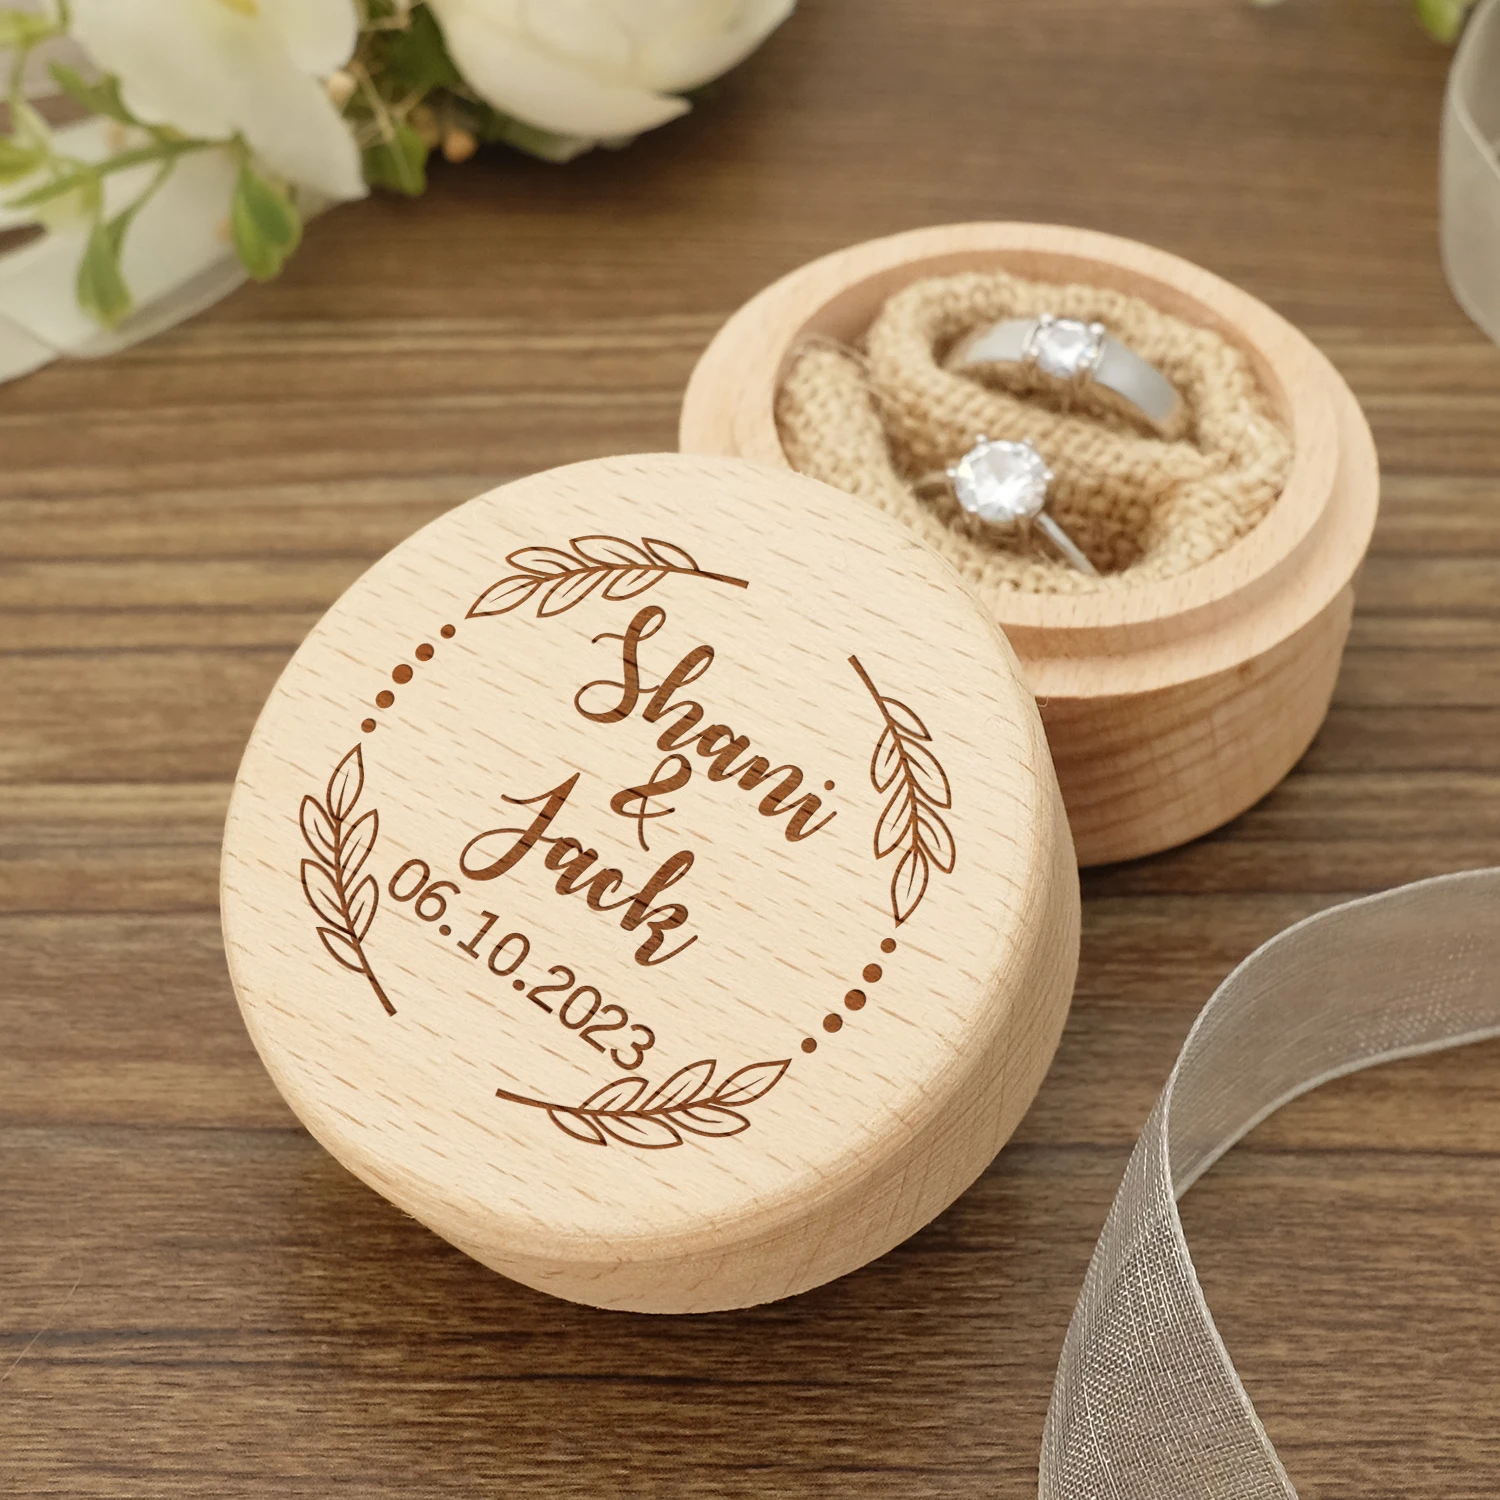 Light up the Moment with a Personalised LED Ring Box